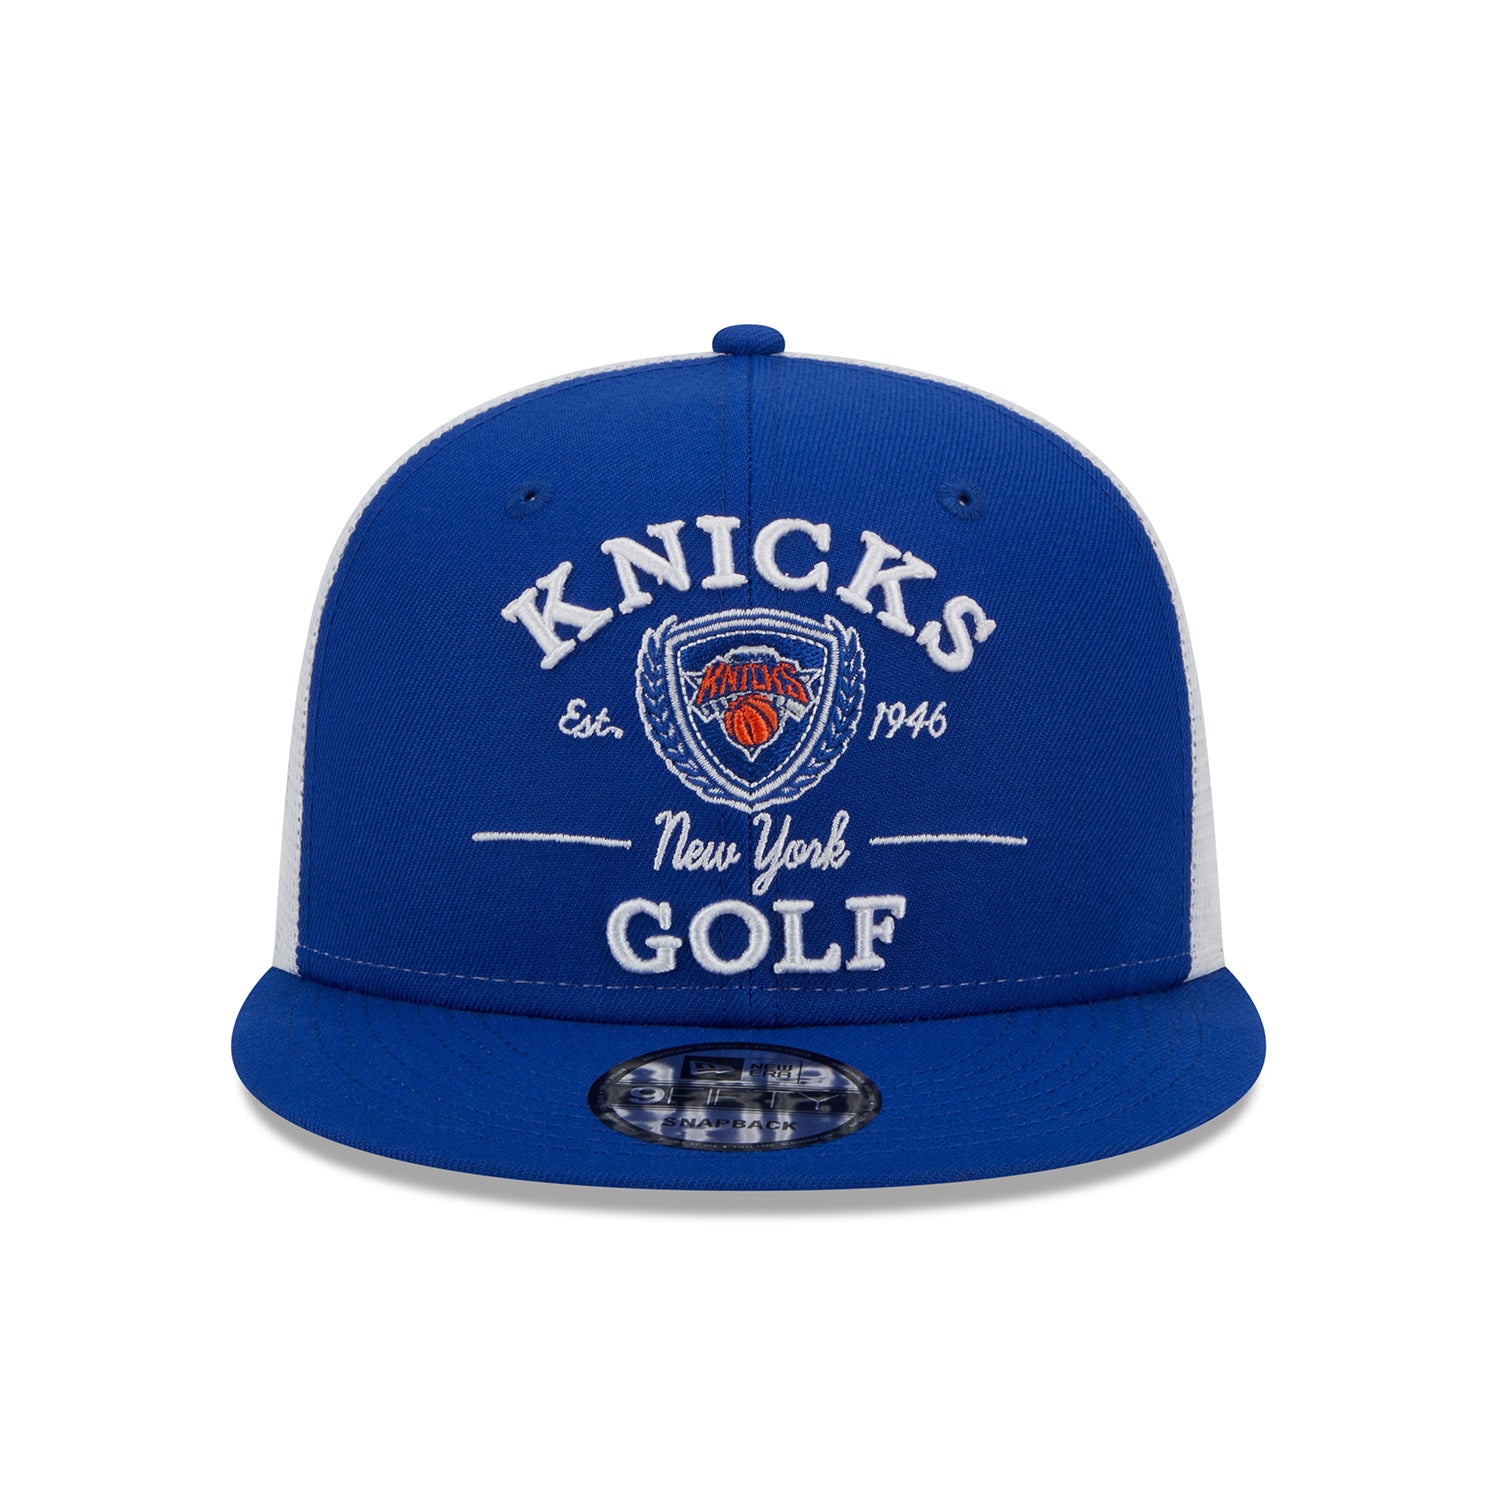 New Era Knicks Golf Club Meshback Snapback Hat In Blue & White - Front View